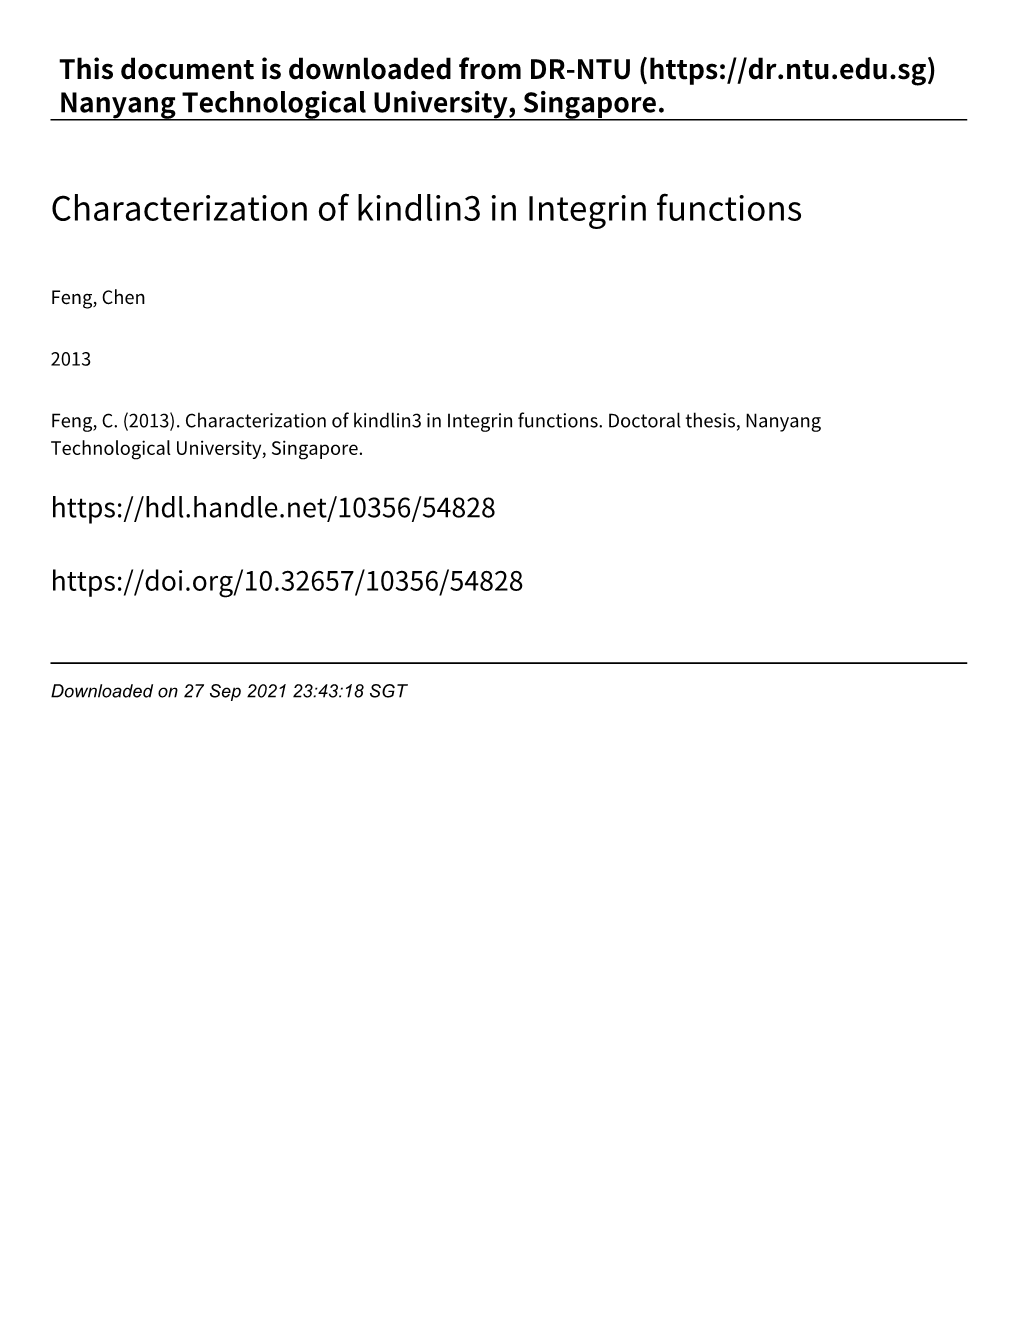 Characterization of Kindlin3 in Integrin Functions